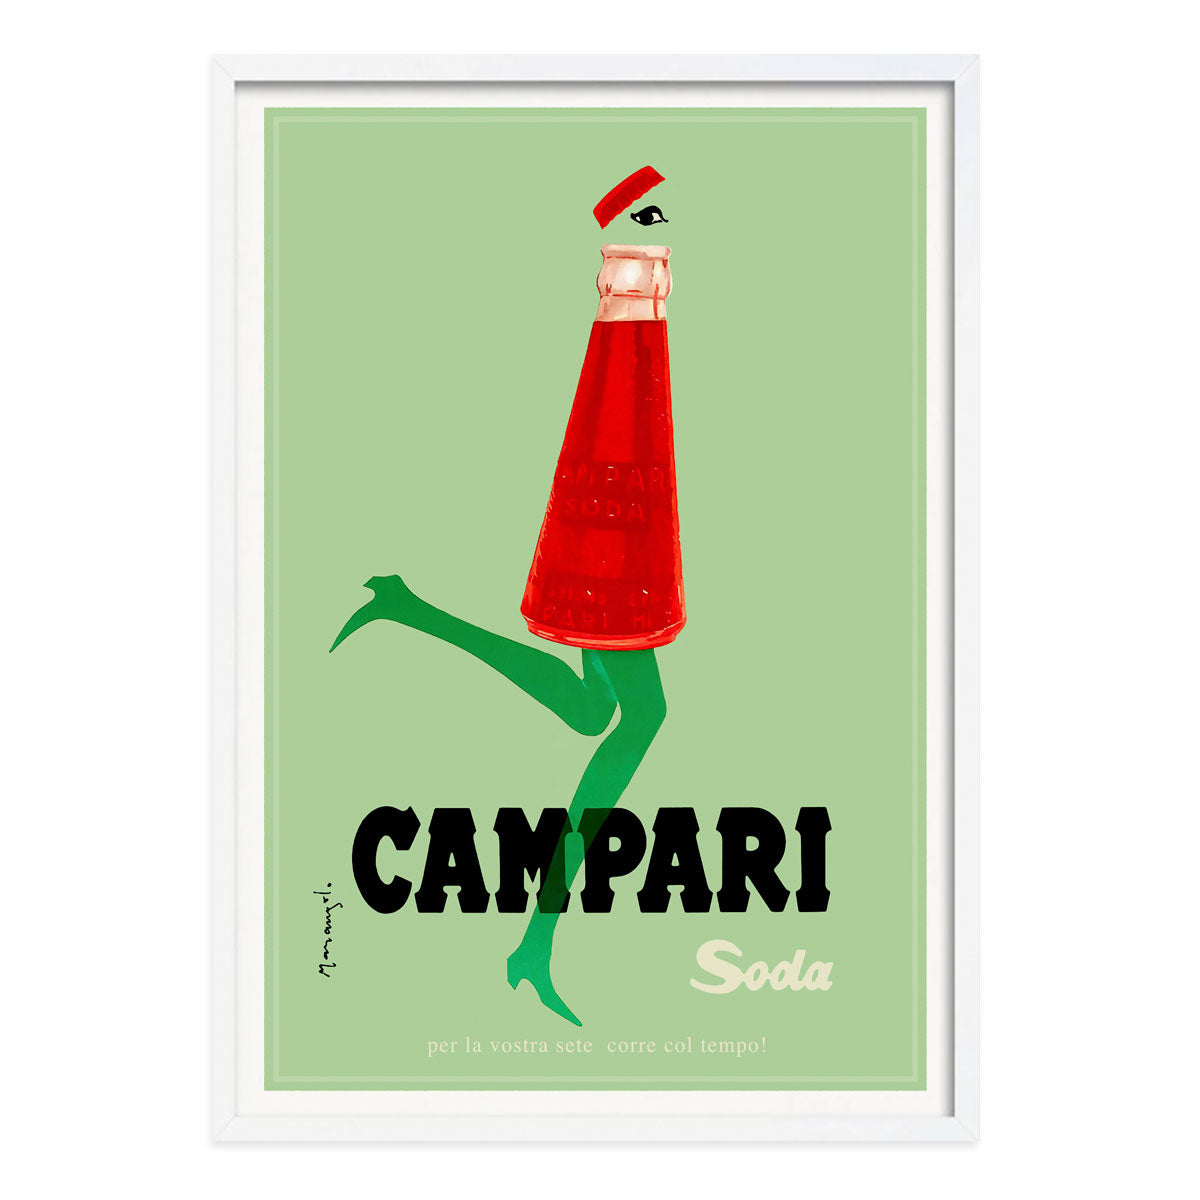 Campari Soda skipping retro vintage poster print in white frame from Places We Luv